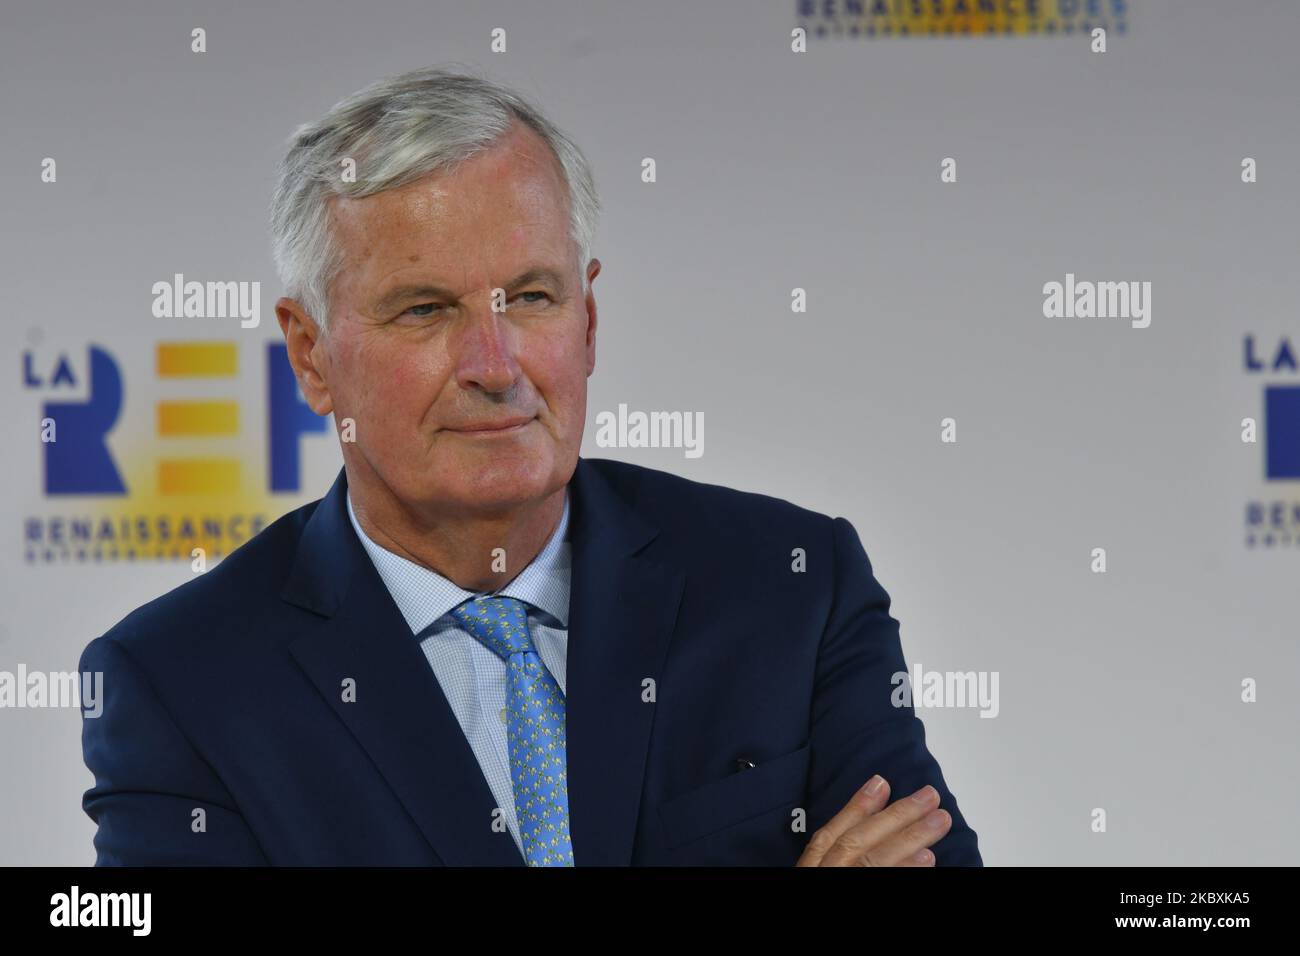 EU's Brexit negotiator Michel Barnier attends at the meeting of French employers' association Medef themed 'The Renaissance of French Companies' on August 26, 2020, in Paris, France. (Photo by Daniel Pier/NurPhoto) Stock Photo